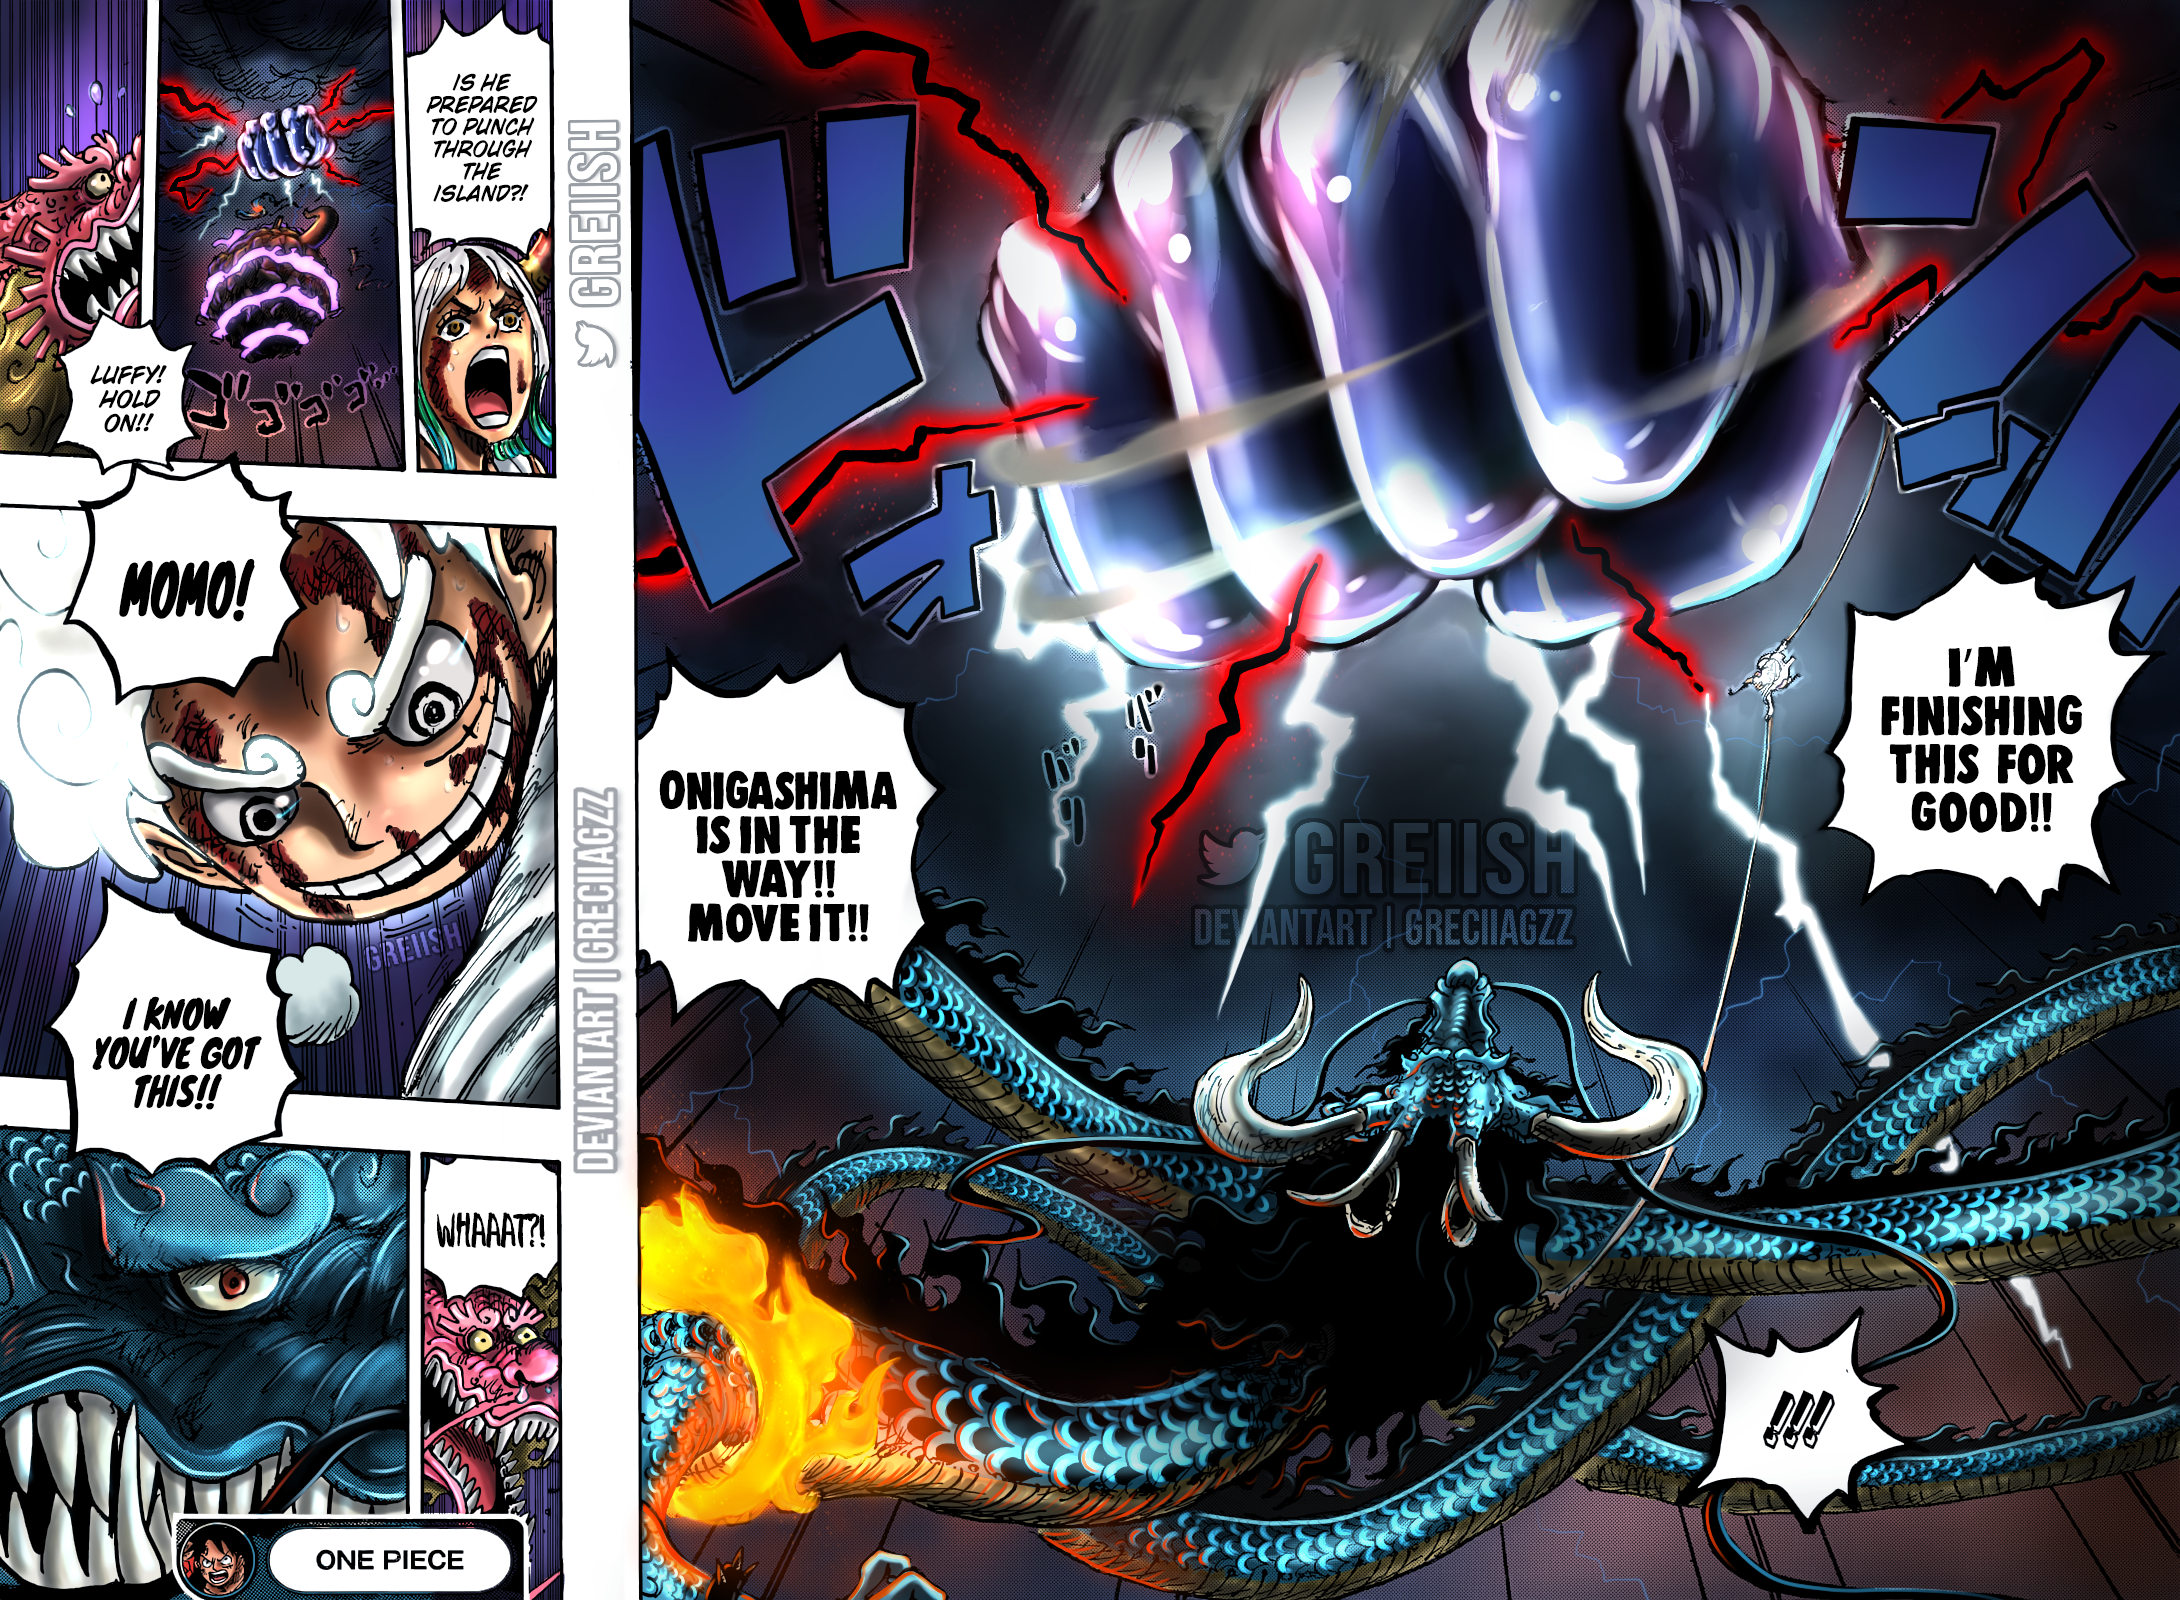 Gear 5 Luffy vs Kaido 🔥 #onepiece1074 Follow me @porrtgas for more peak  content 🗣️